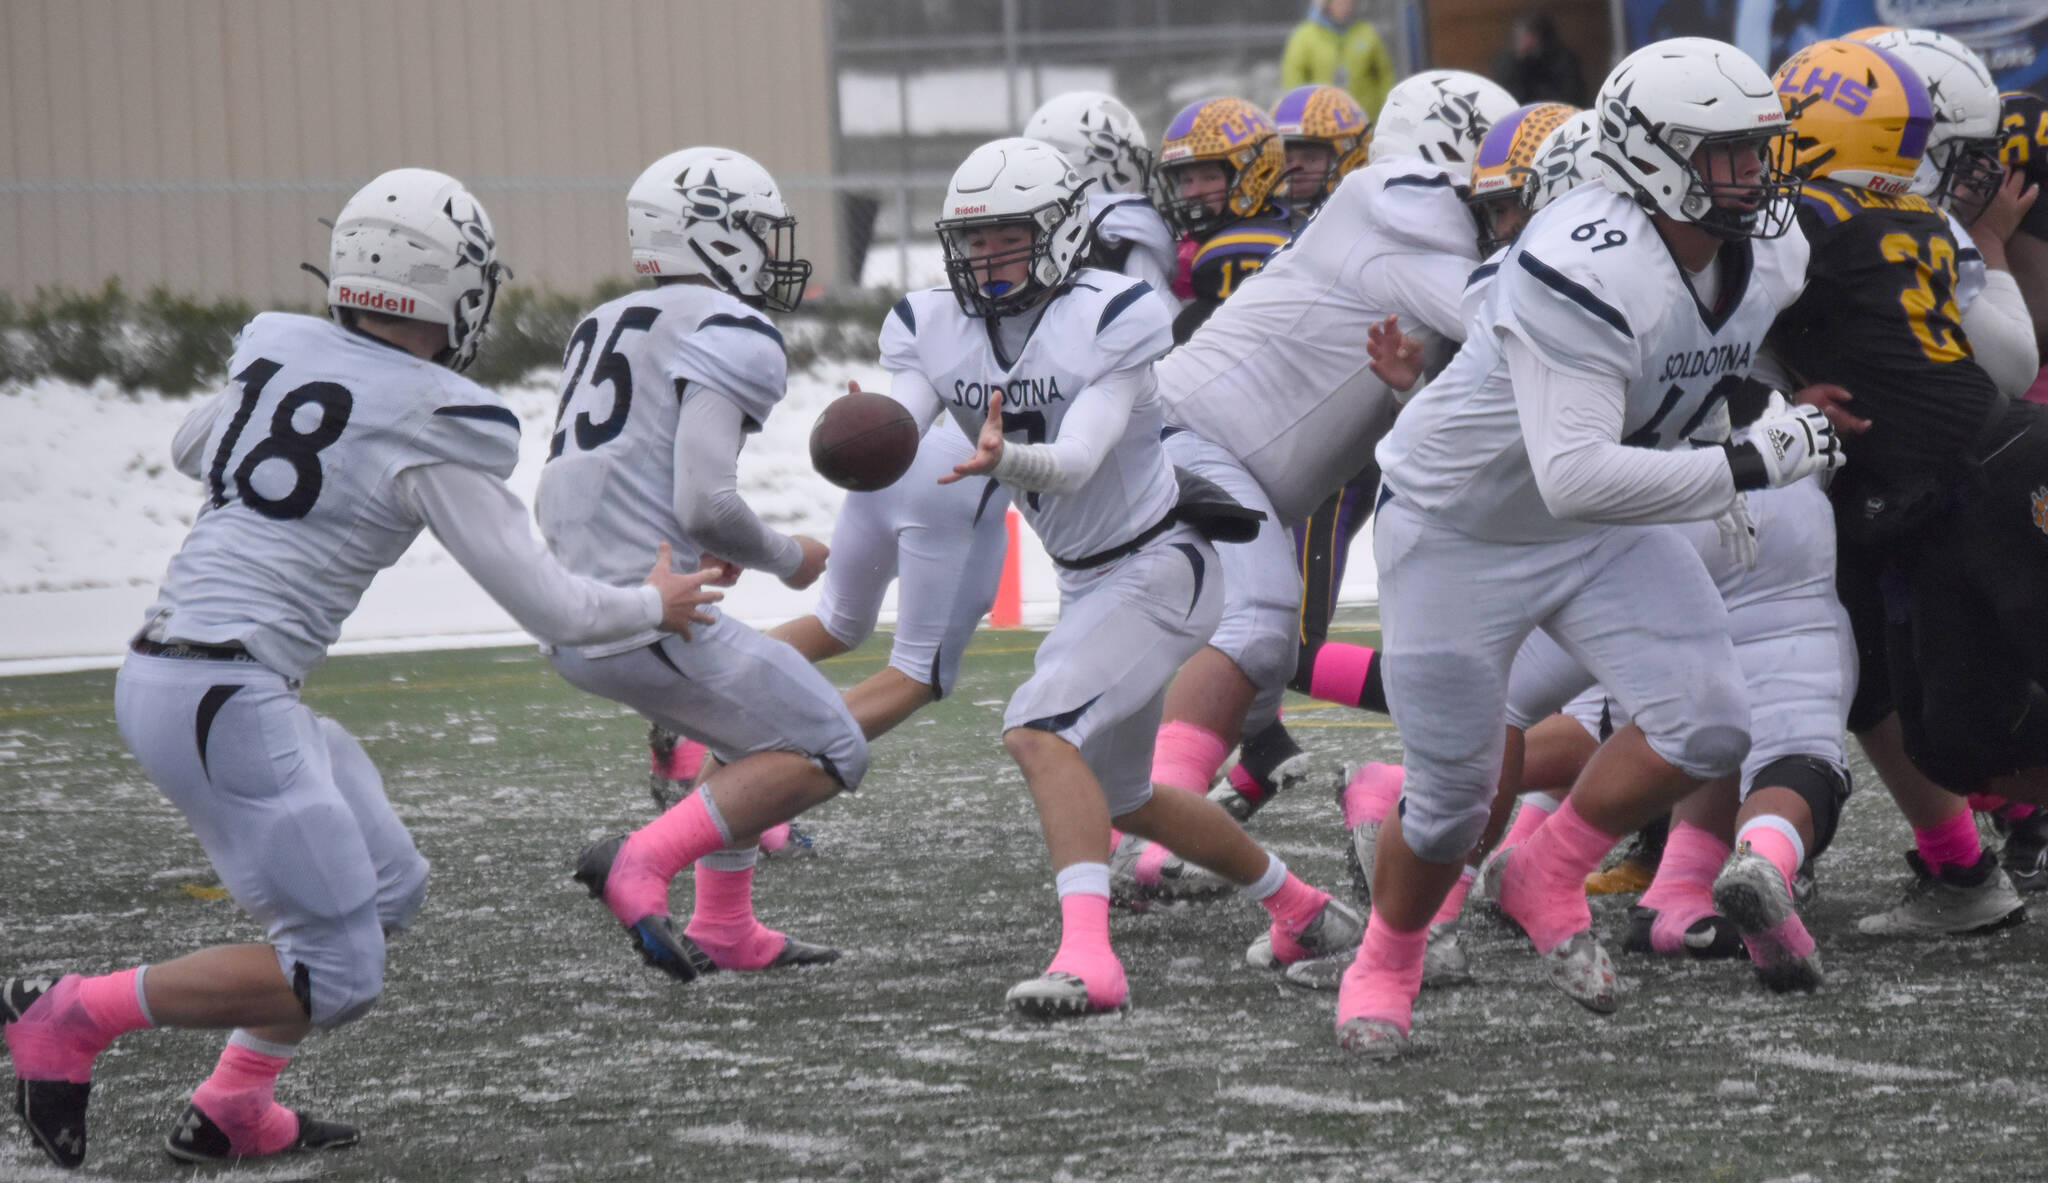 Soldotna's Zac Buckbee pitches to Collin Peck for a touchdown run Saturday, Oct. 15, 2022, in the Division II state championship game at Service High School in Anchorage, Alaska. (Photo by Jeff Helminiak/Peninsula Clarion)